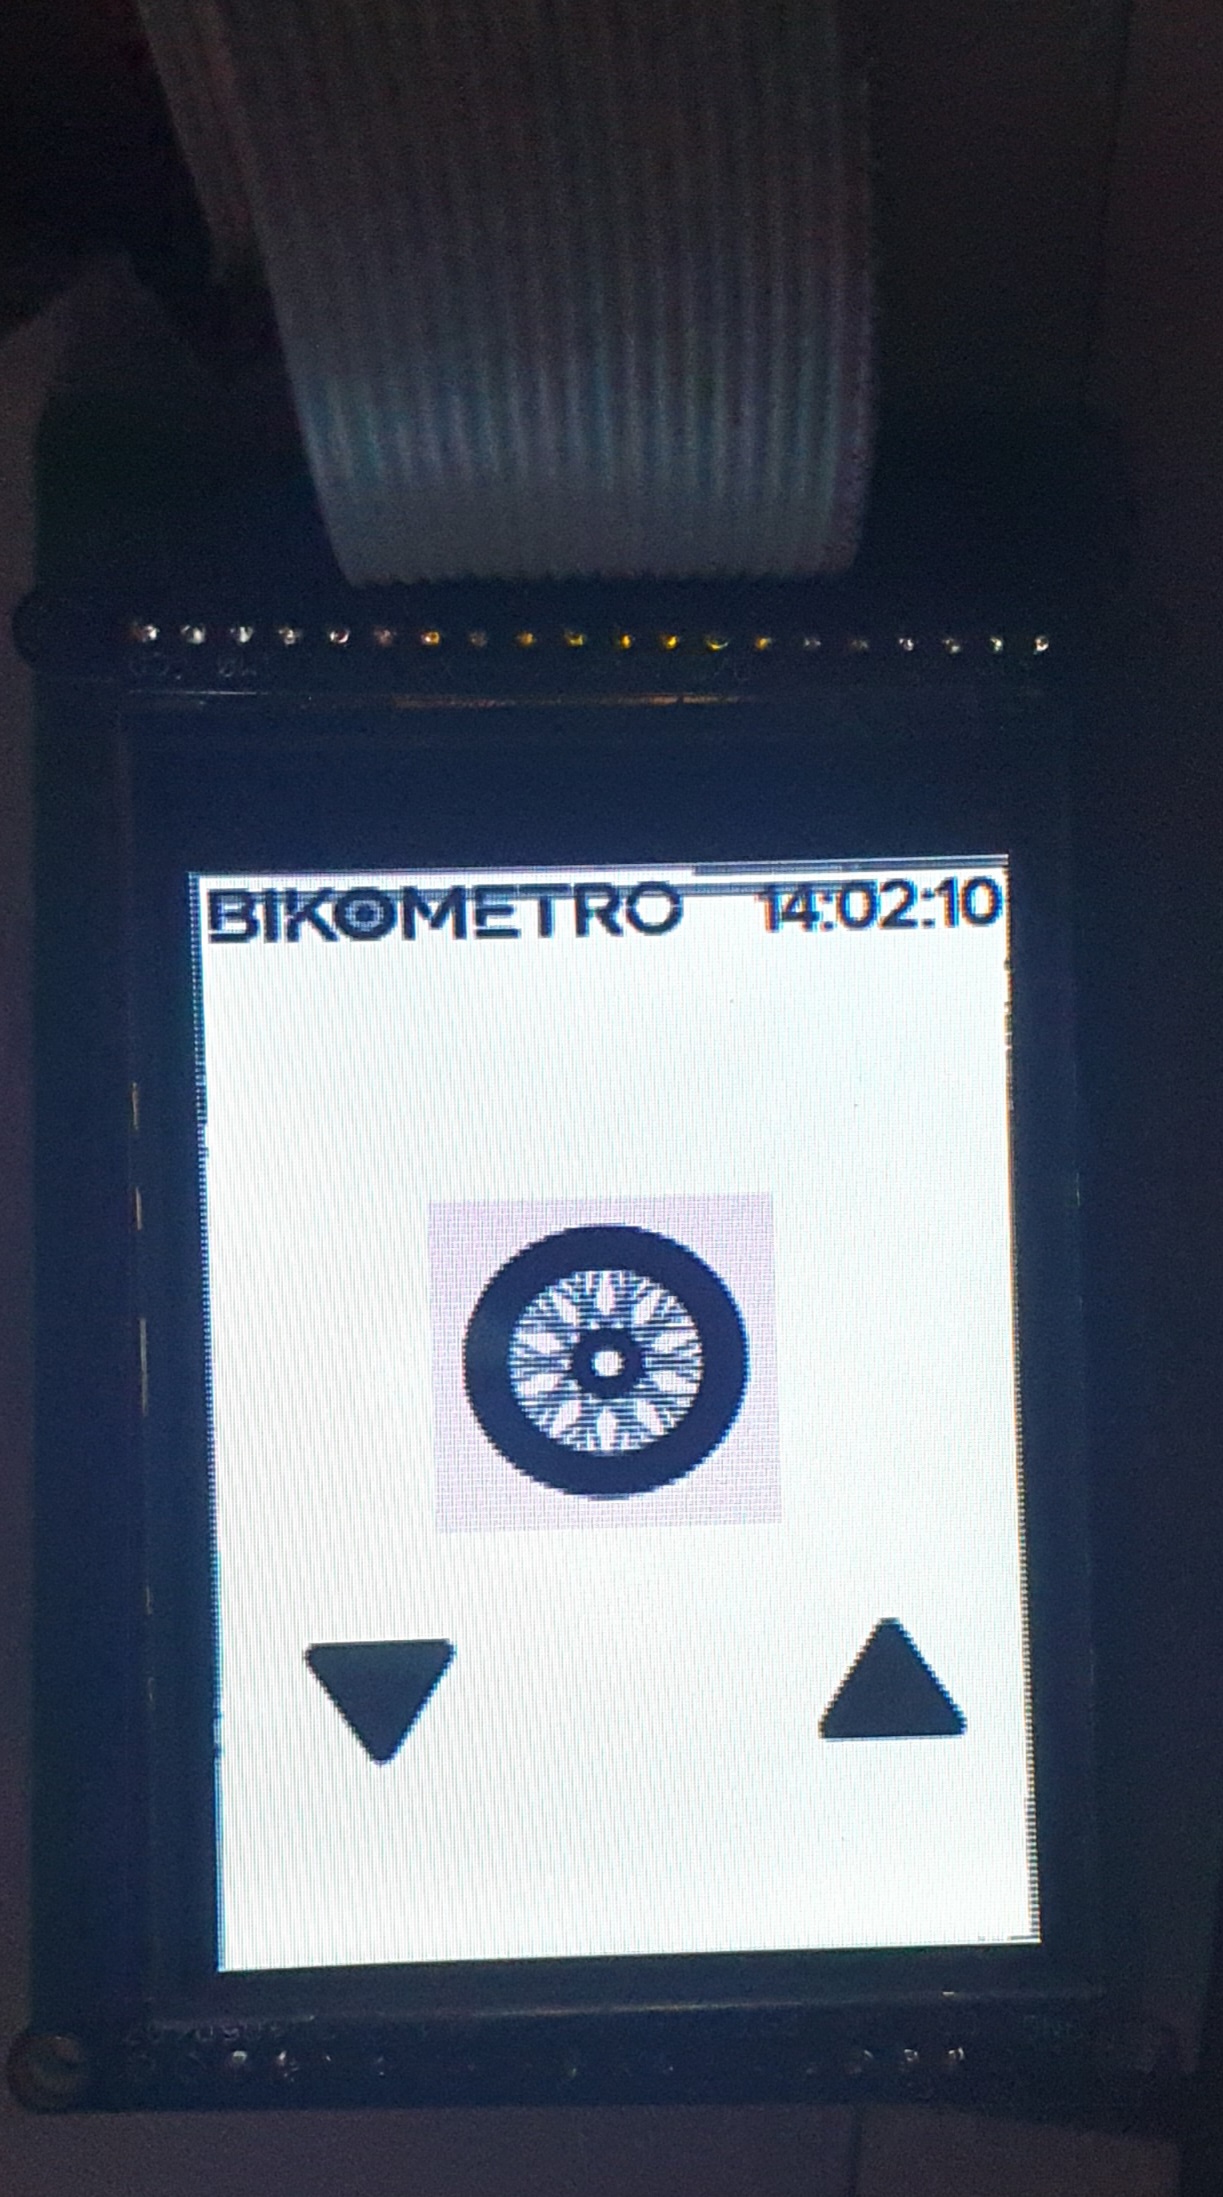 Second screen of the interface on the LCD